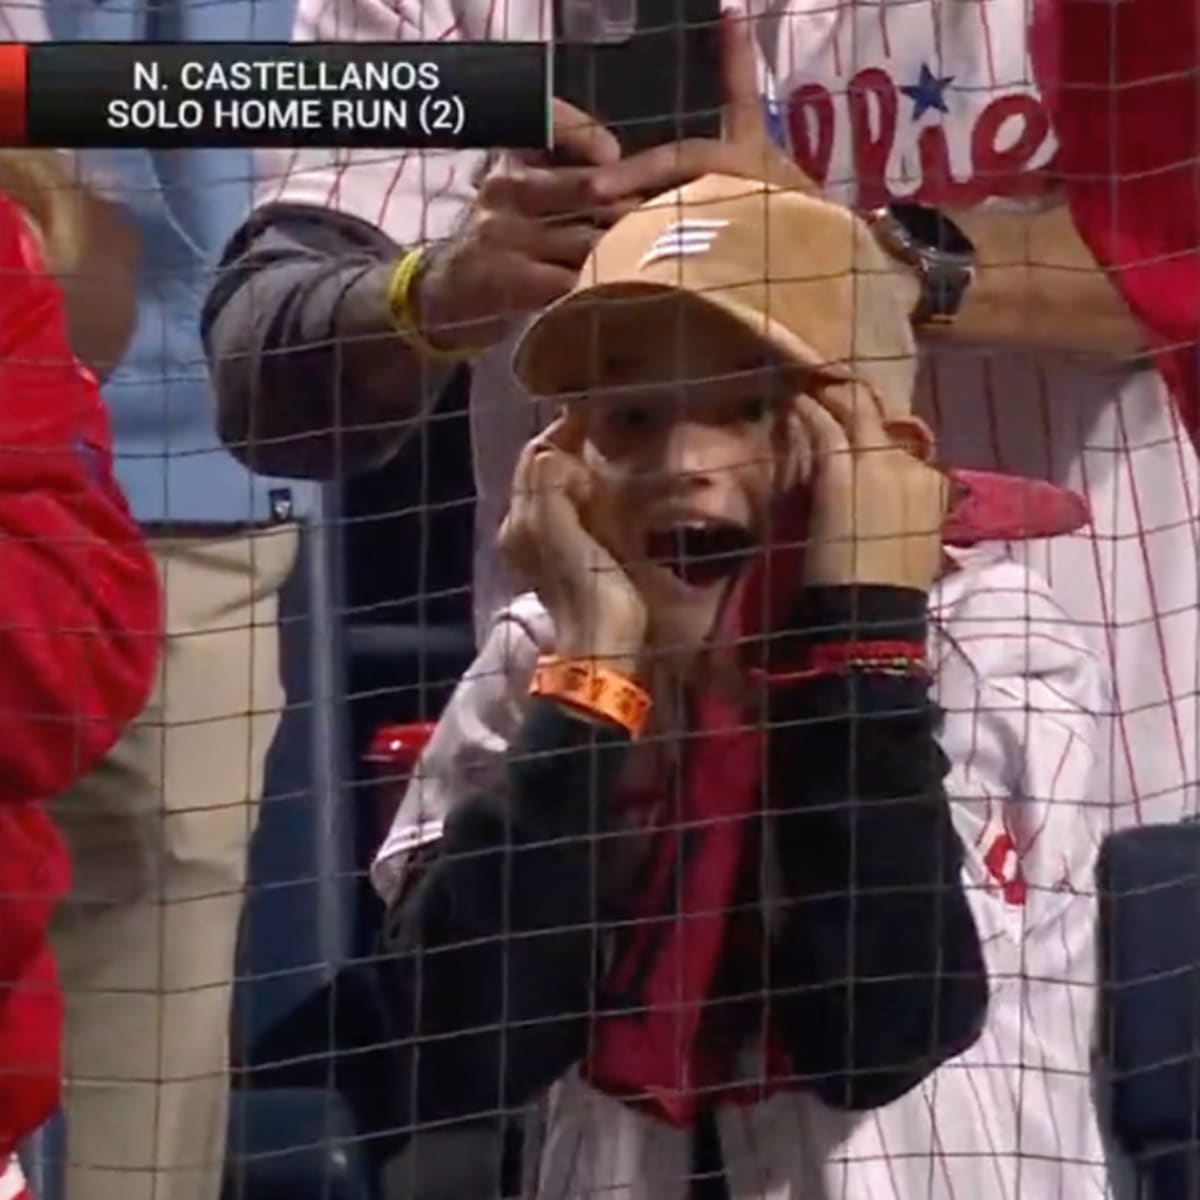 Liam Castellanos steals hearts after dad's home run against the Braves